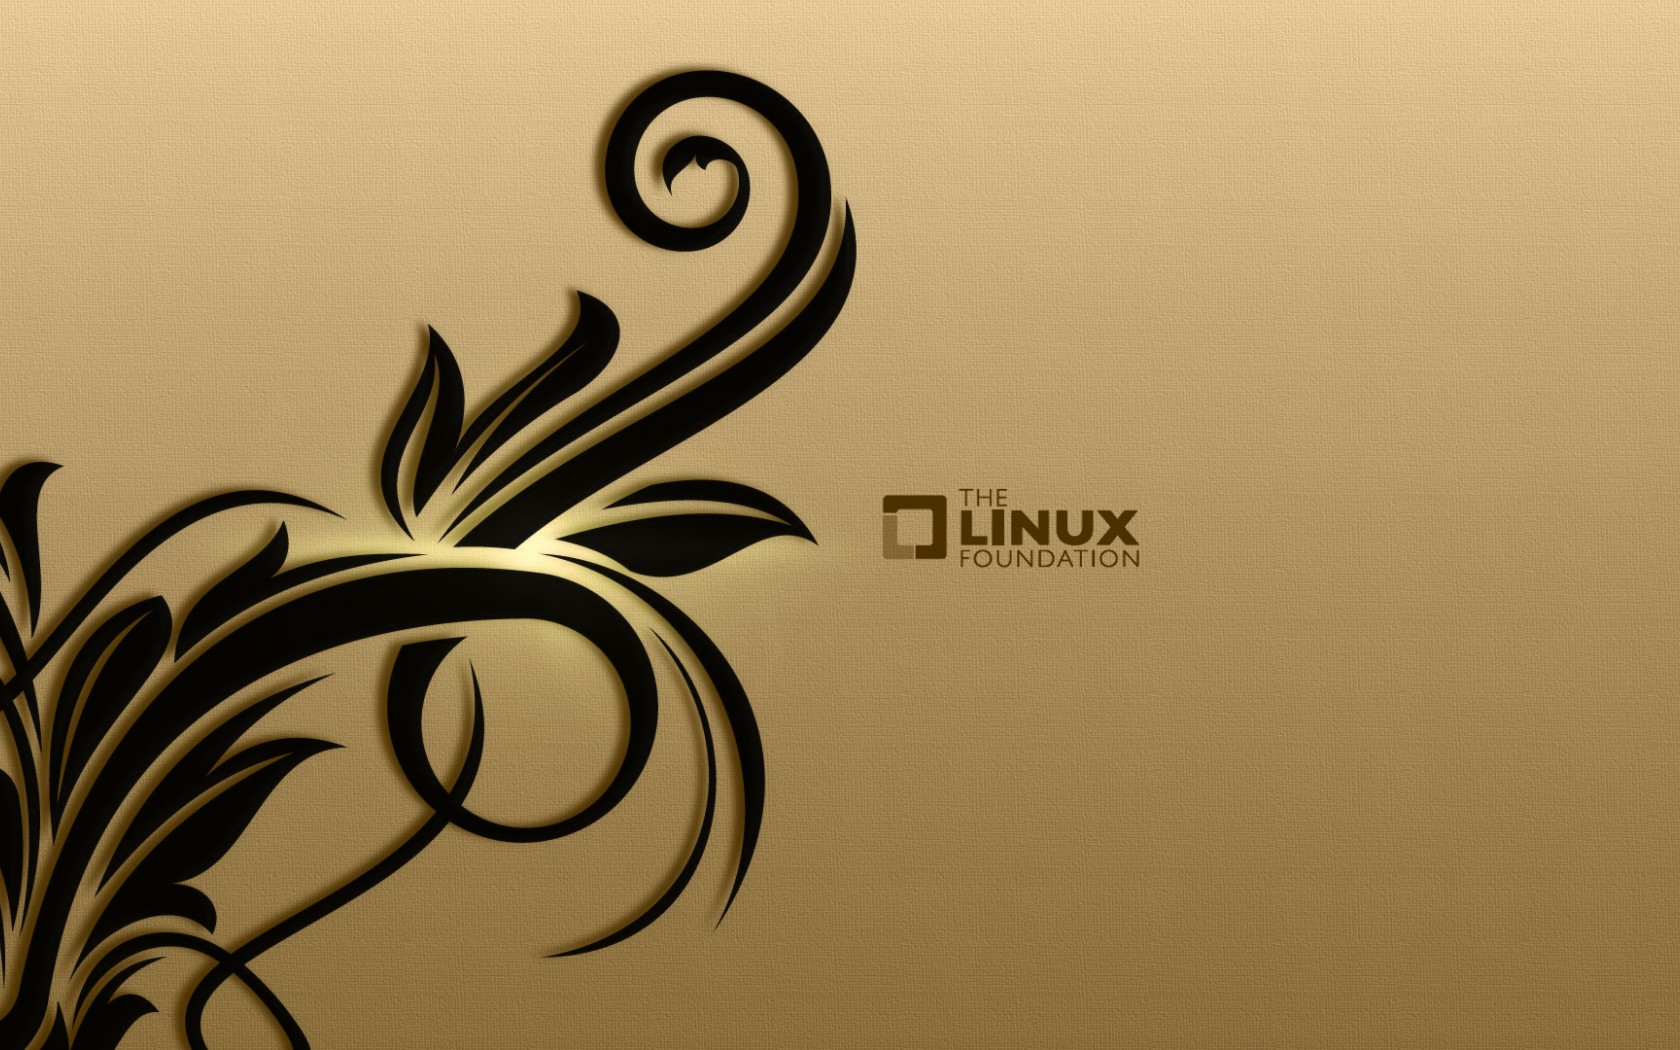 Linux Foundation Background Wallpapers